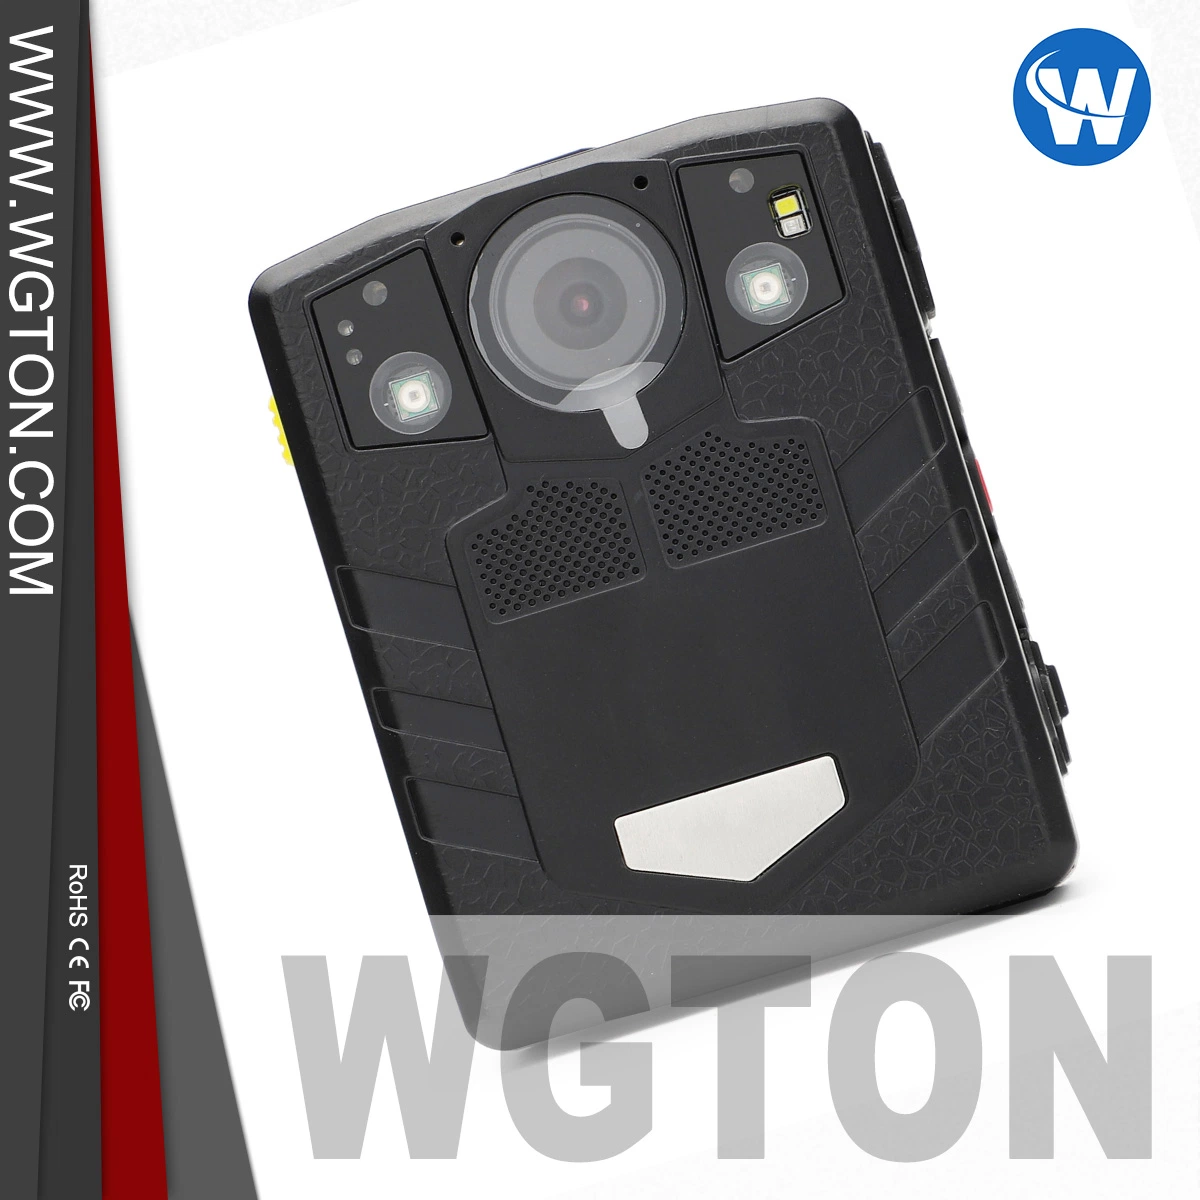 Rugged Waterproof IP67 1296p GPS Optional Police Body Worn Camera for Law Enforcement